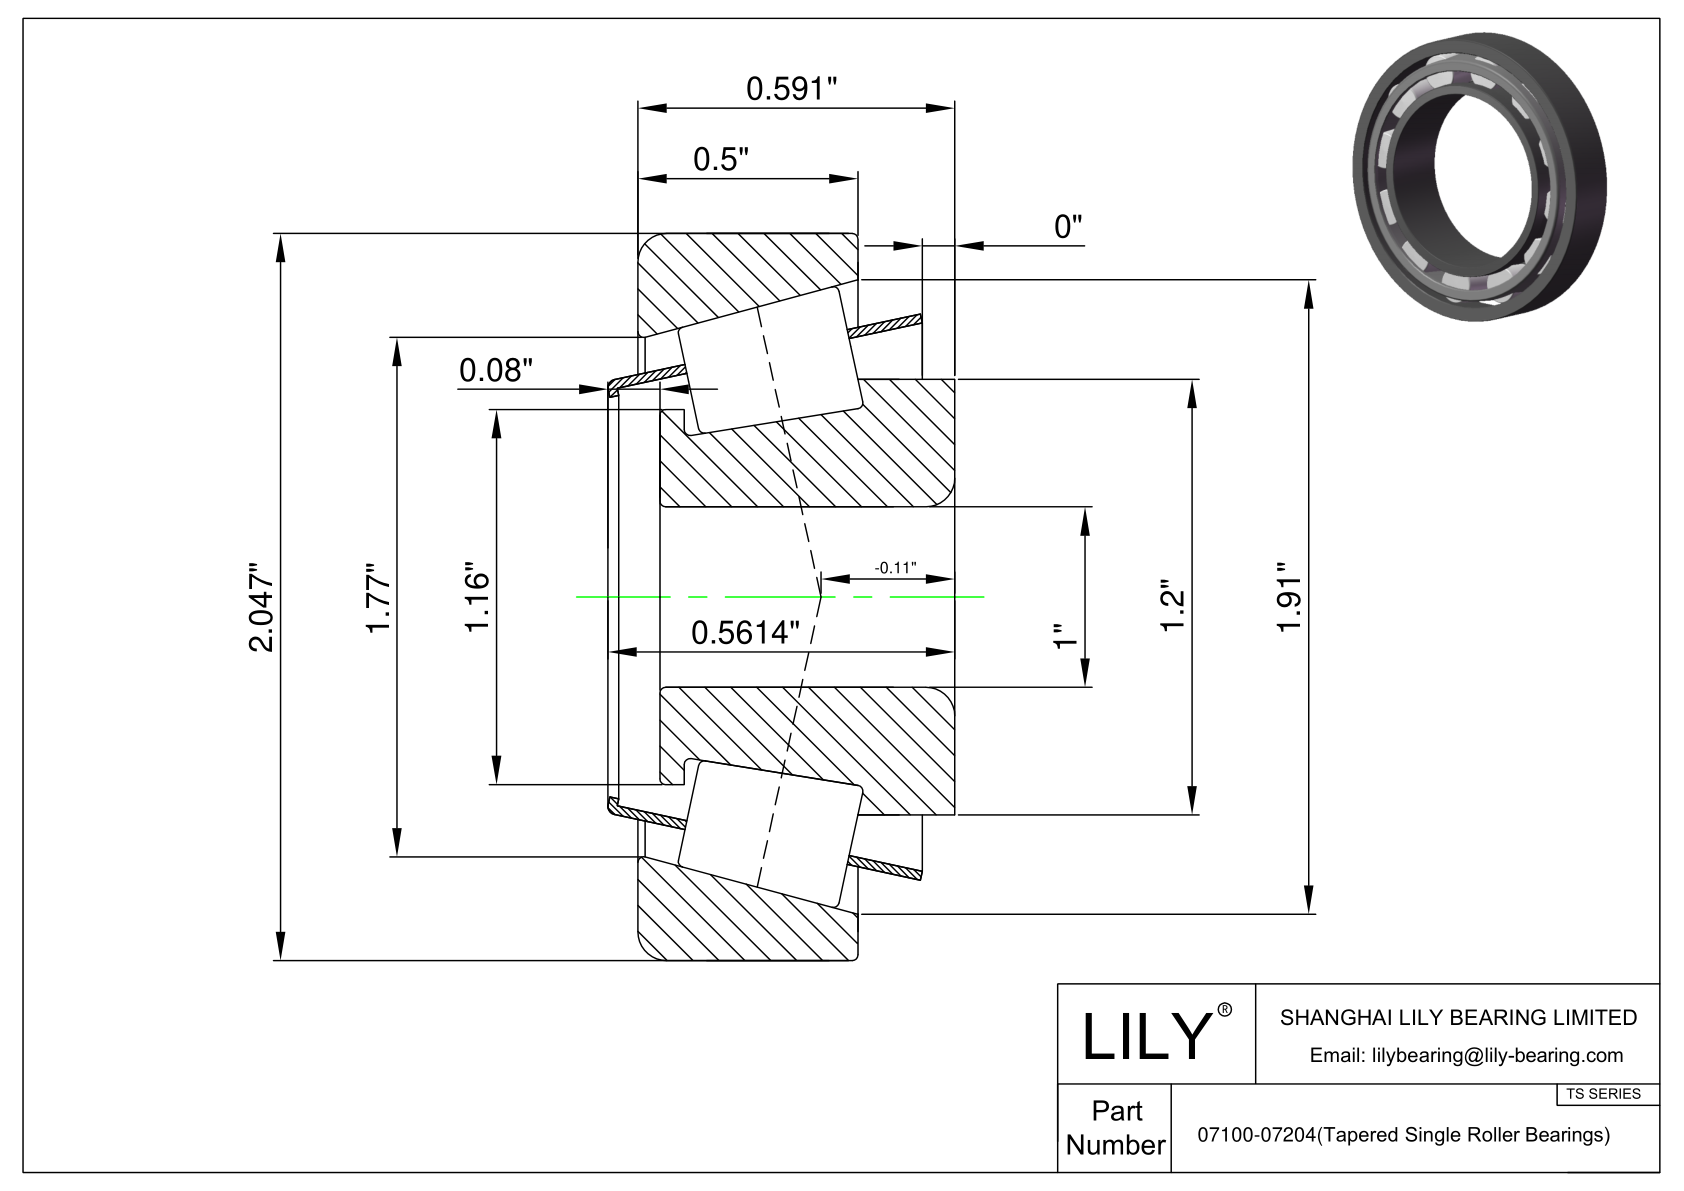 07100-07204 TS (Tapered Single Roller Bearings) (Imperial) cad drawing